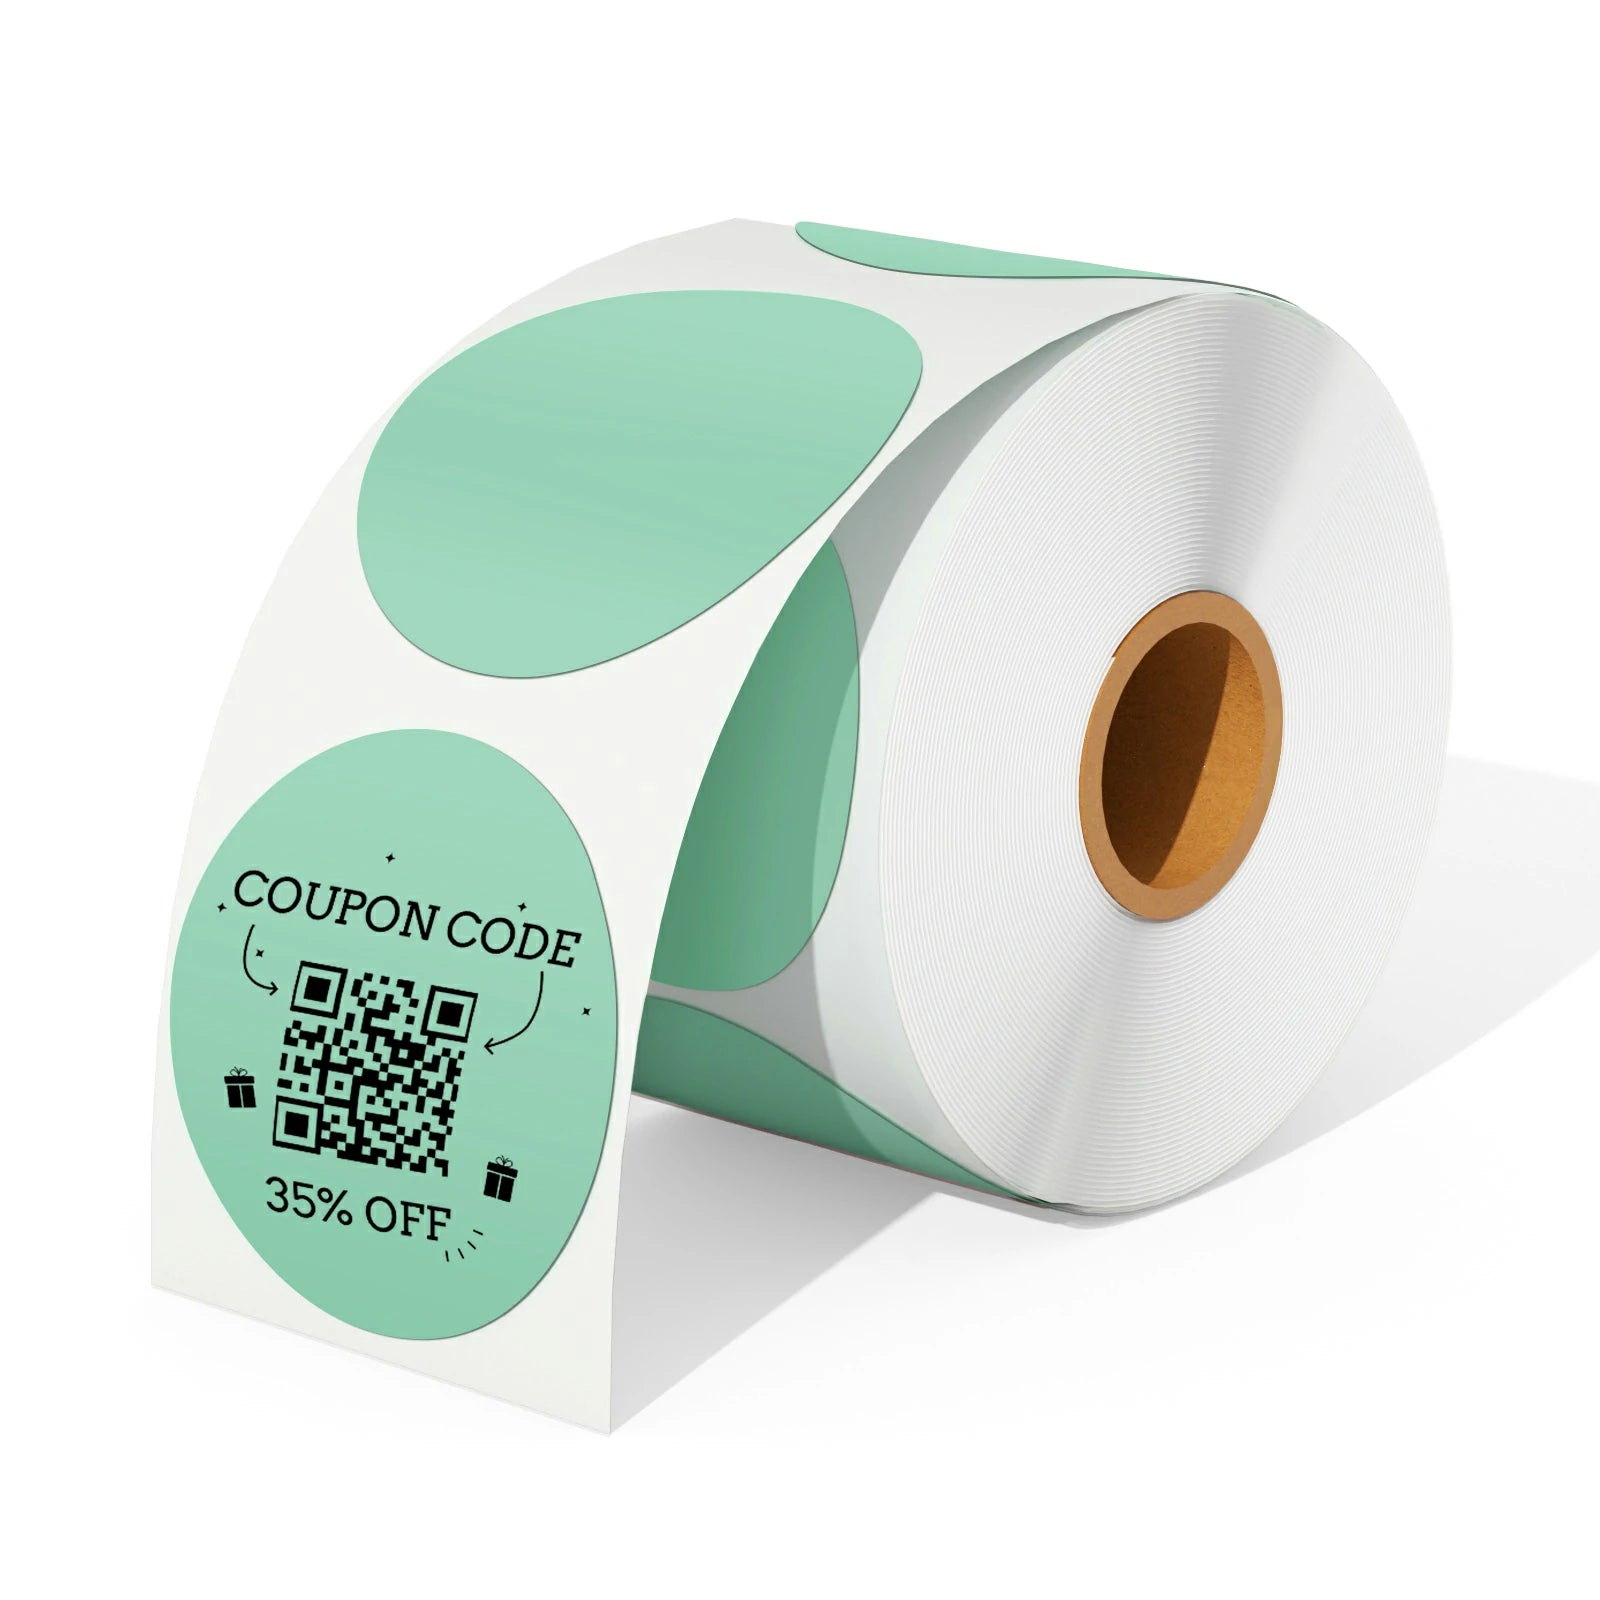 The green round thermal labels can be used as personalised sticker labels.